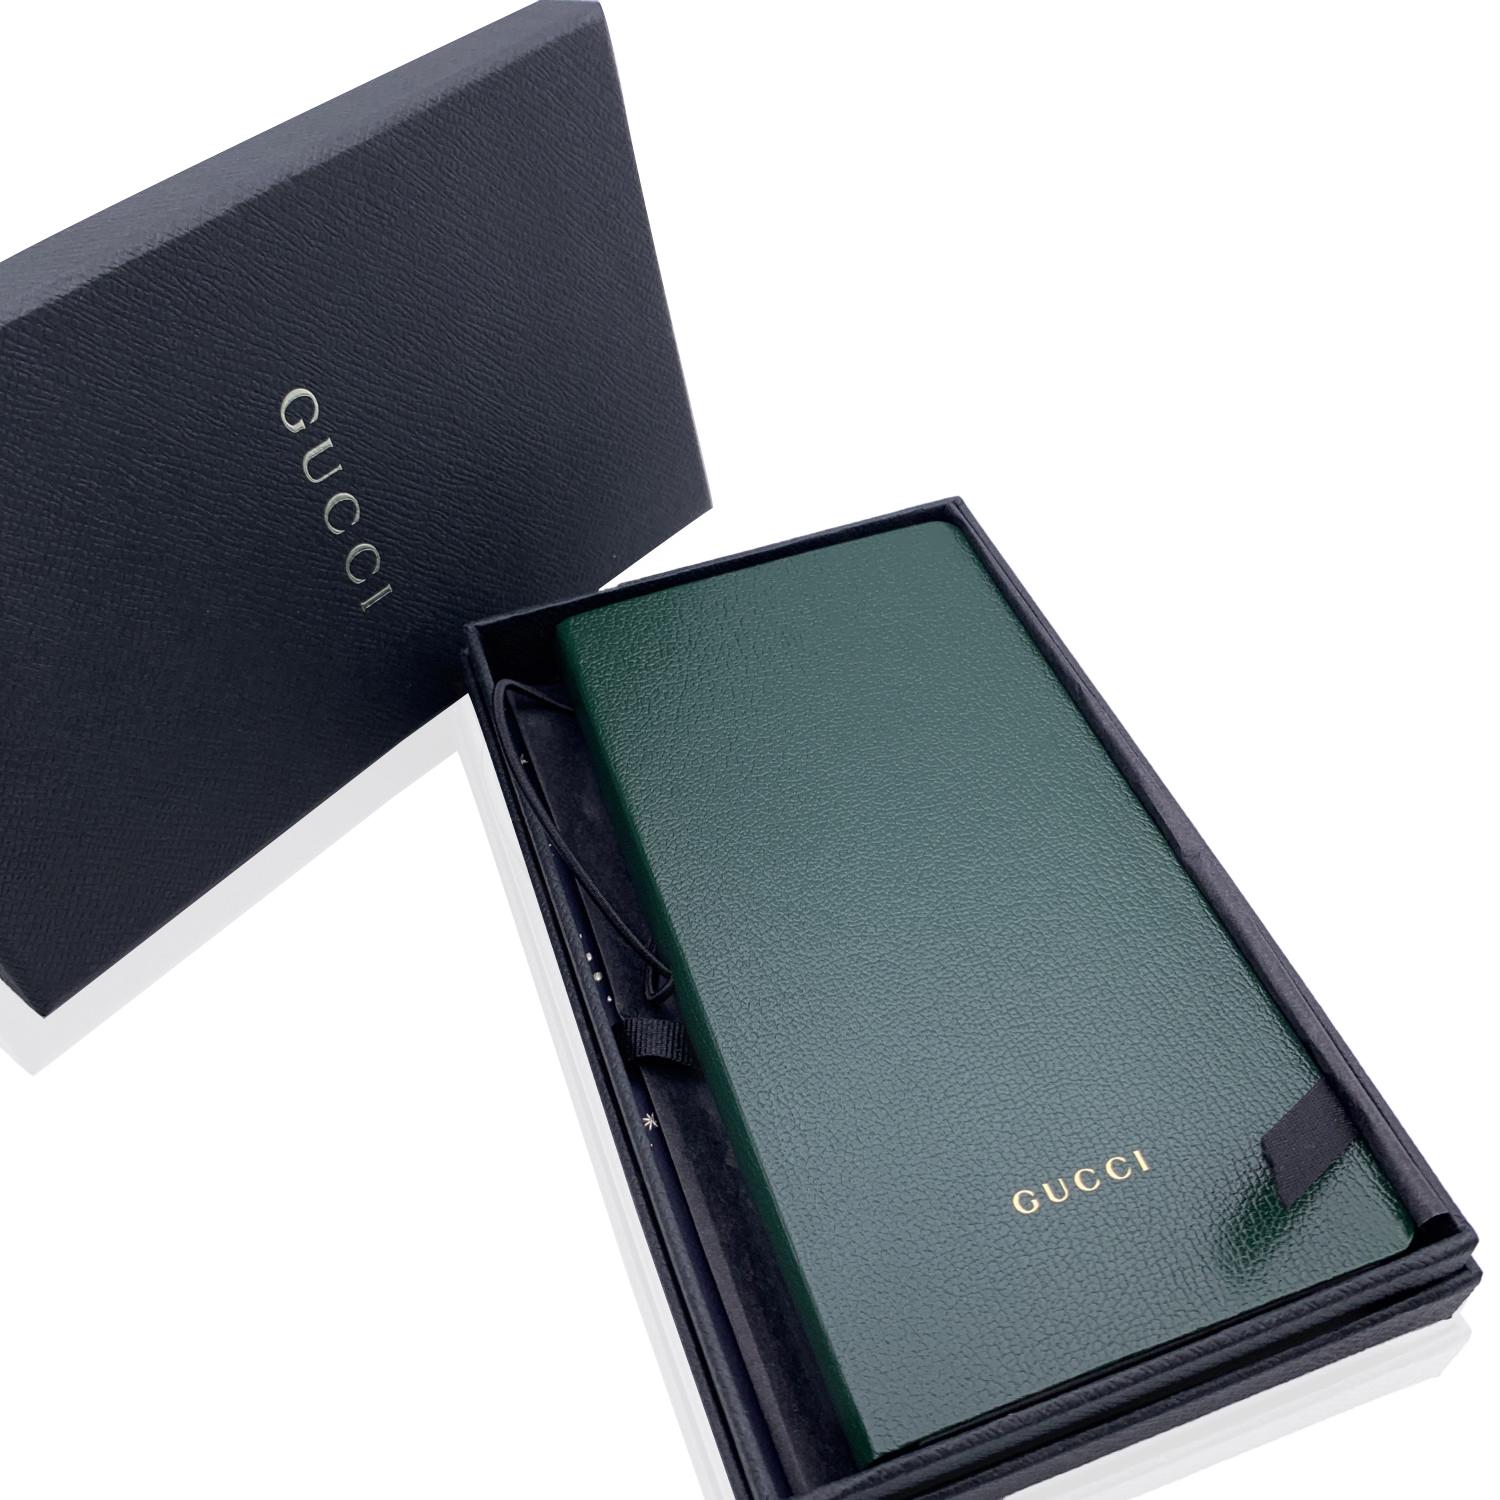 Gucci notebook with accordion card holder. Green cover. Gucci logo embossed on the front. Removable notebook with black pages on a side and accordion card holder on the other side. Elastic closure. Measurements: 7.25 x 3.5 inches - 18.5 x 8.9 cm.